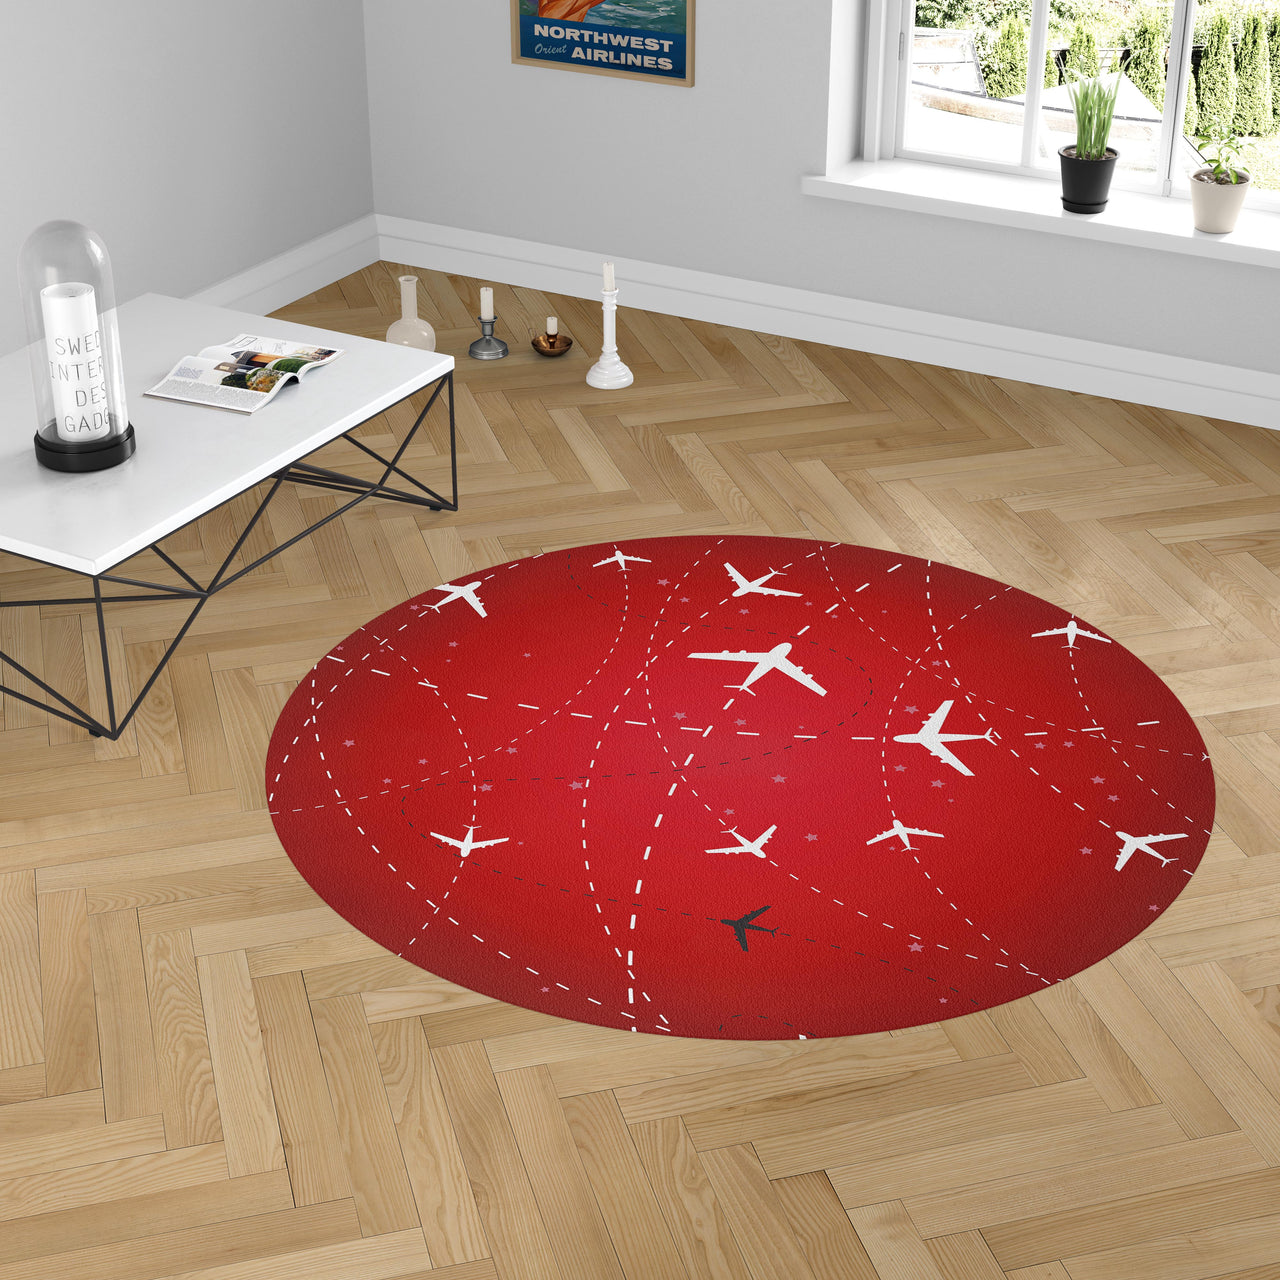 Travelling with Aircraft (Red) Designed Carpet & Floor Mats (Round)